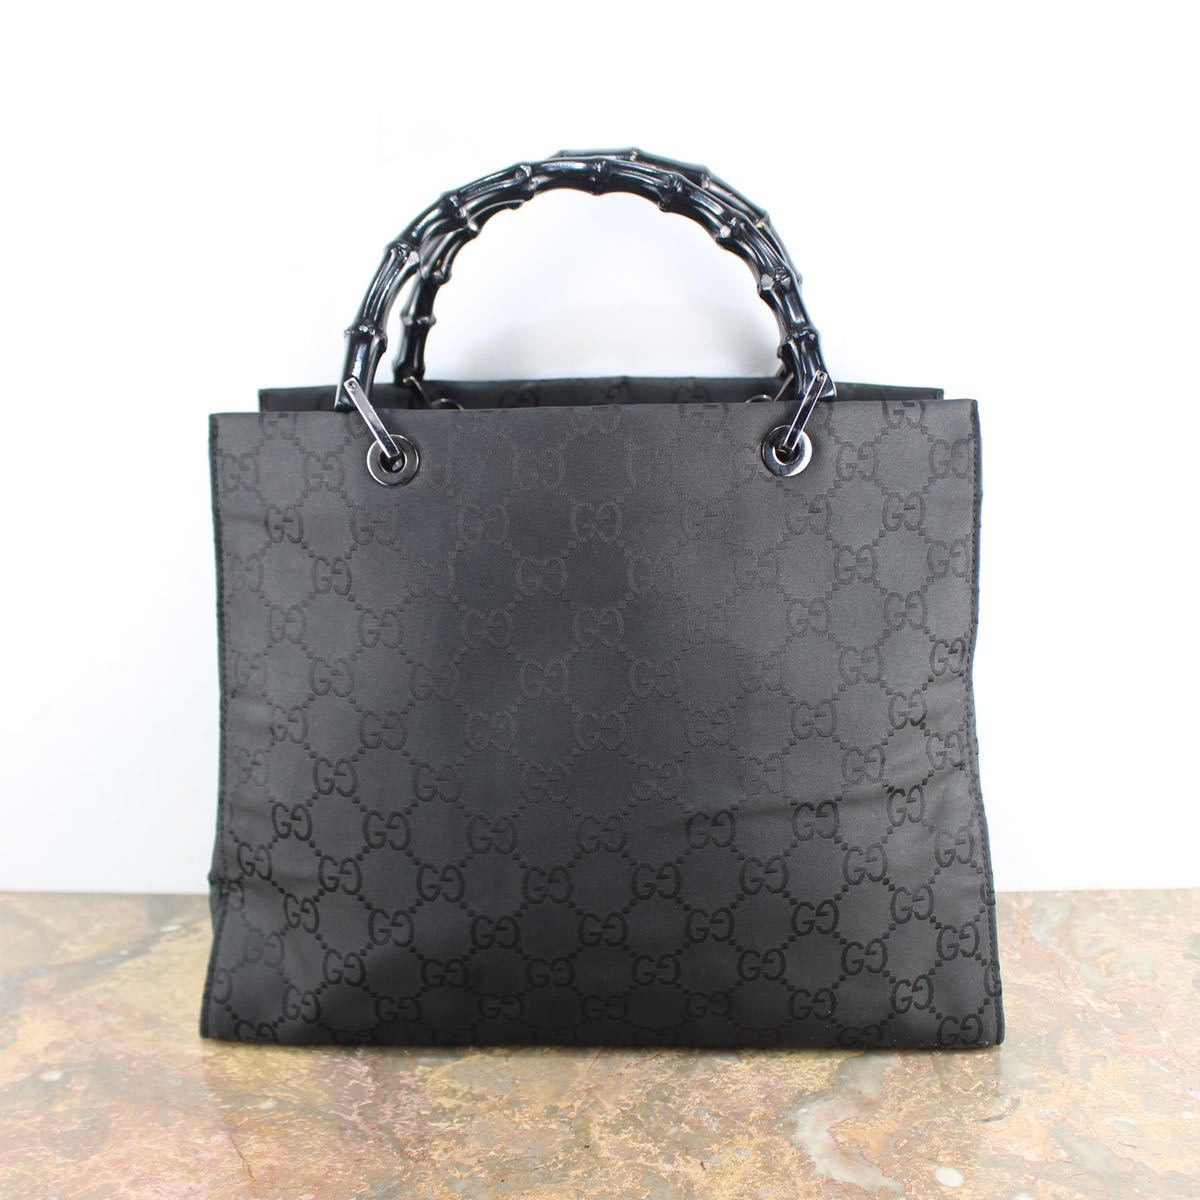 GUCCI GG PATTERNED NYLON BAMBOO HAND BAG MADE IN ITALY/グッチGG柄